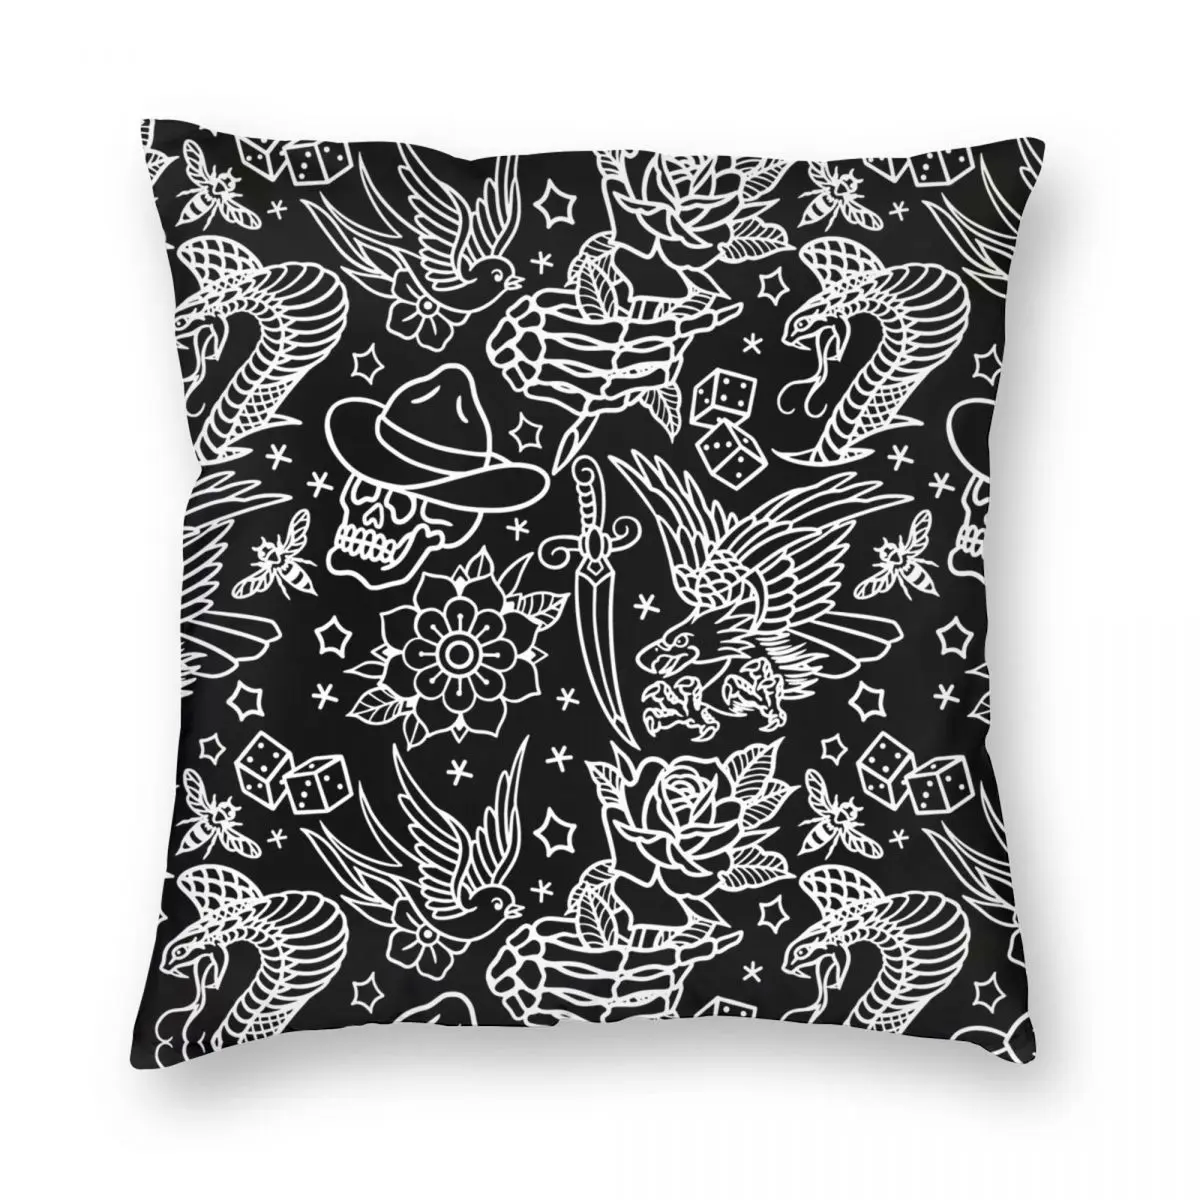 

American Traditional Tattoo Flash Square Pillowcase Polyester Linen Velvet Zip Decor Throw Pillow Case Room Cushion Cover 45x45